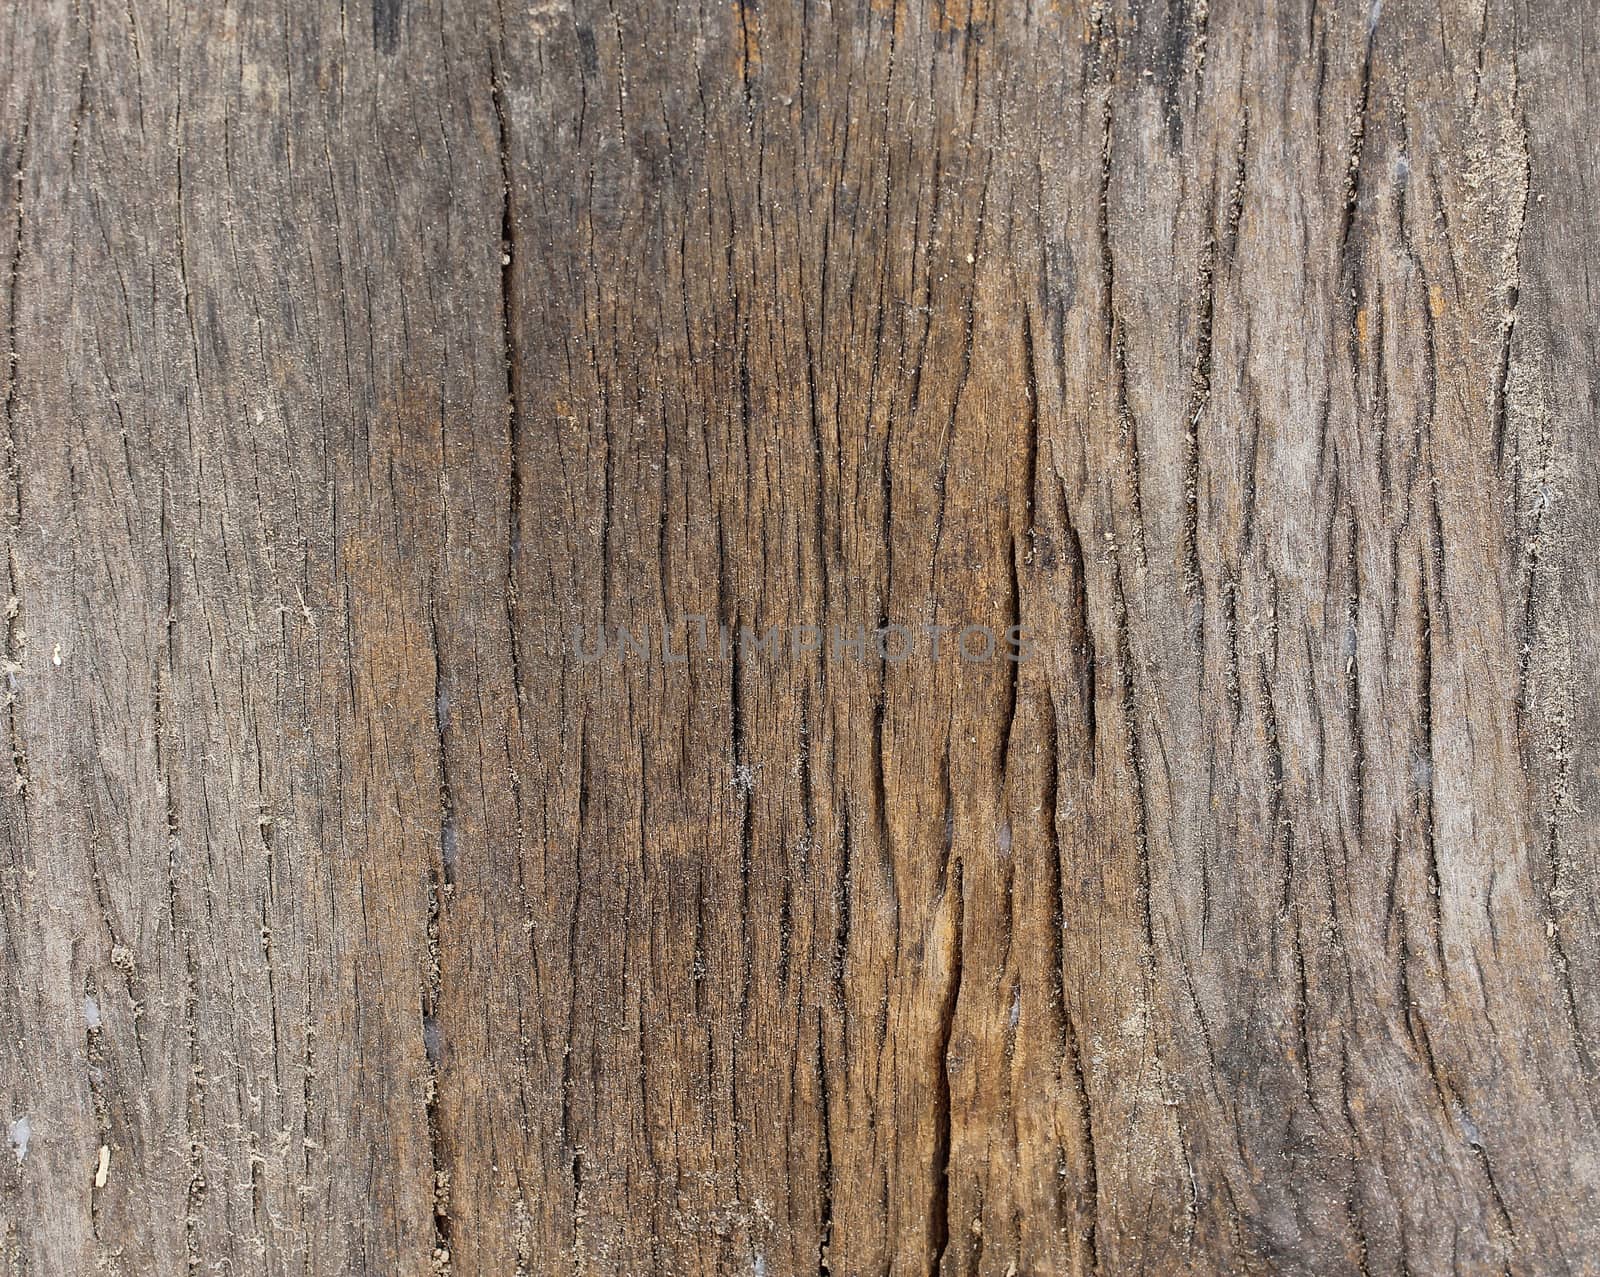 old Wood Texture by pumppump